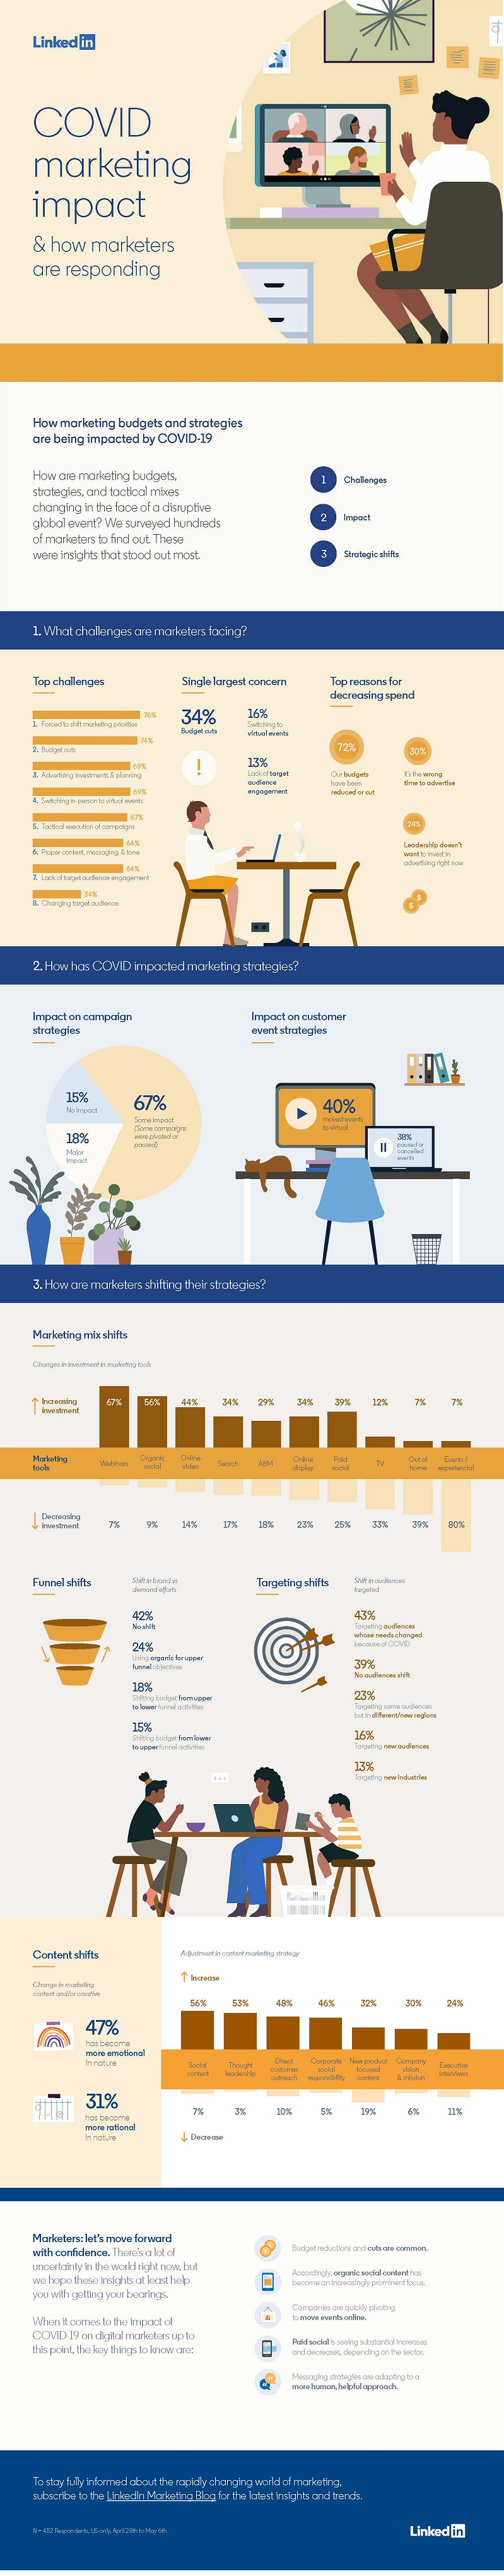 linkedin publishes new data on how marketers are dealing with the impacts of covid 19 infographic